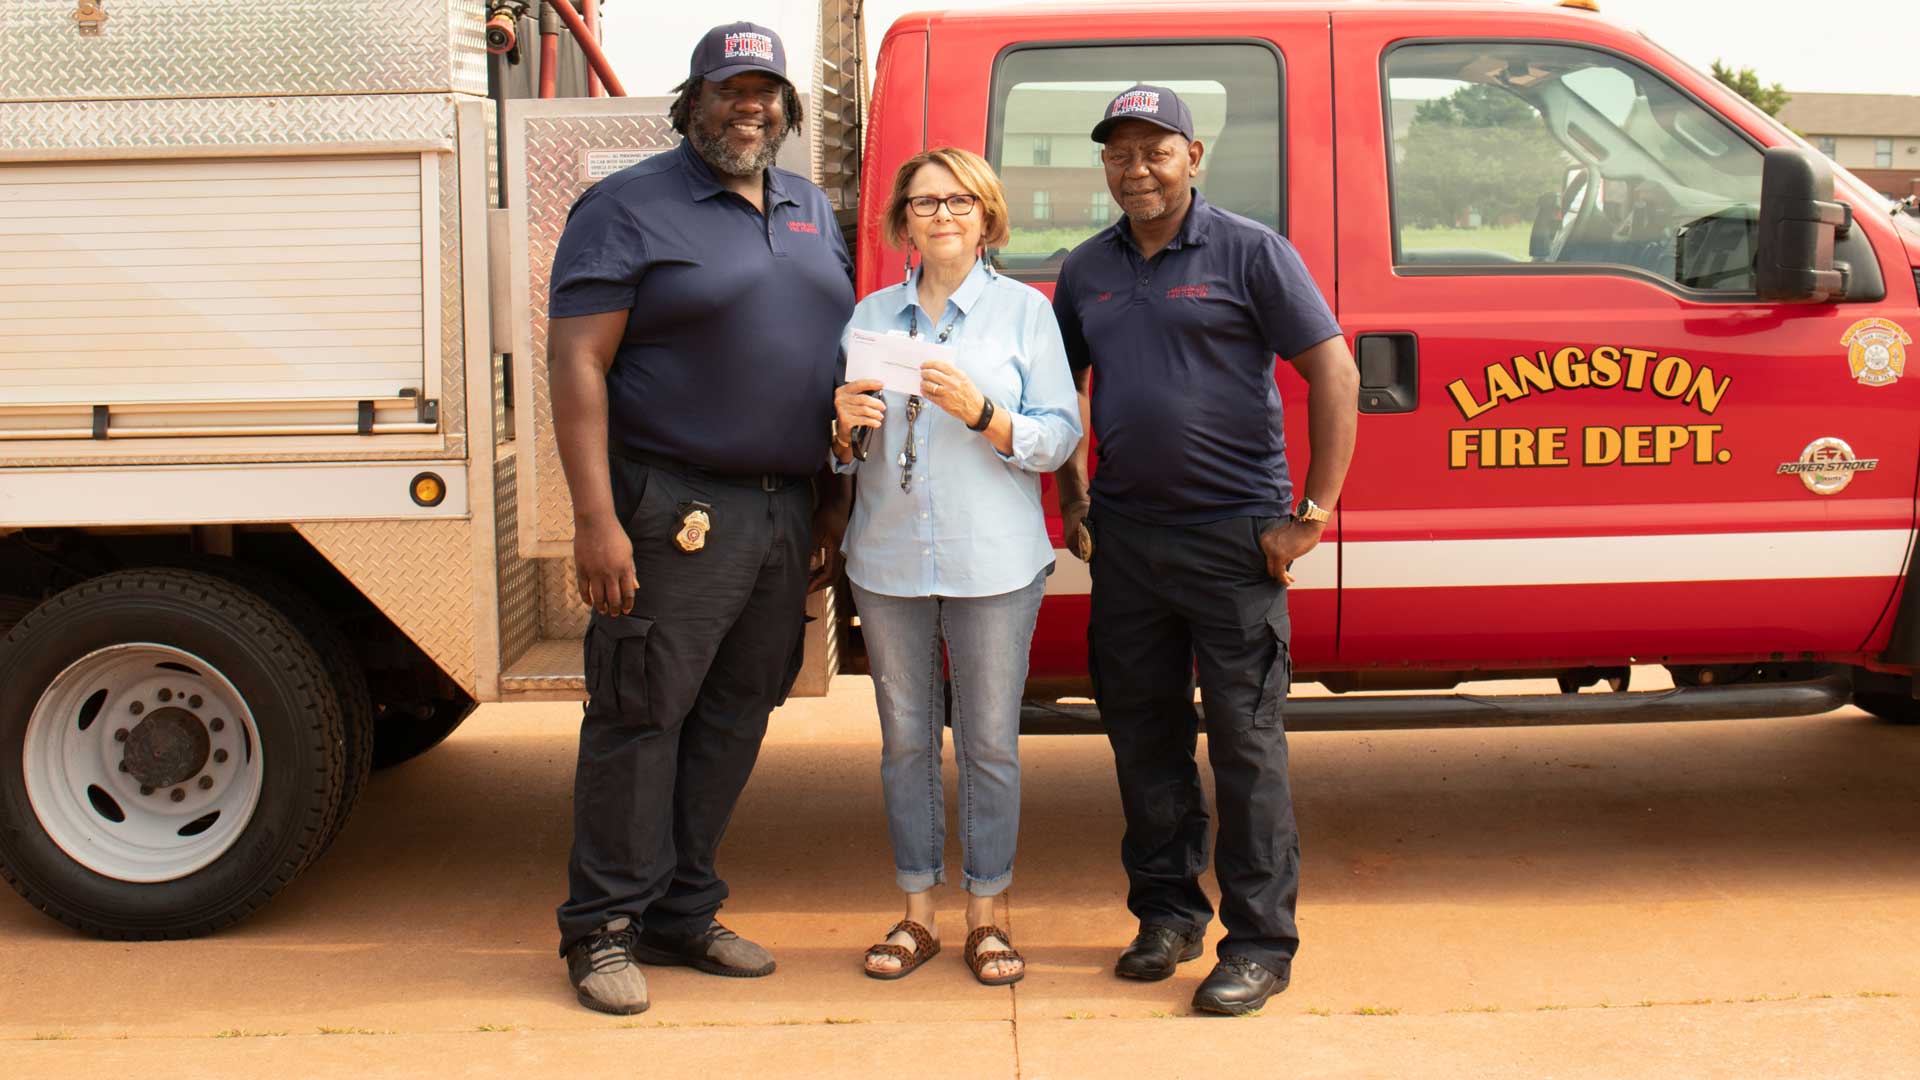 Langston Fire Department receives Central Foundation Grant. Pictured are Langston Fire Department Lieutenant, Morgan Smith; Janie Carey, Community Foundation Board Member; and Fire Chief, Clint Winfrey.